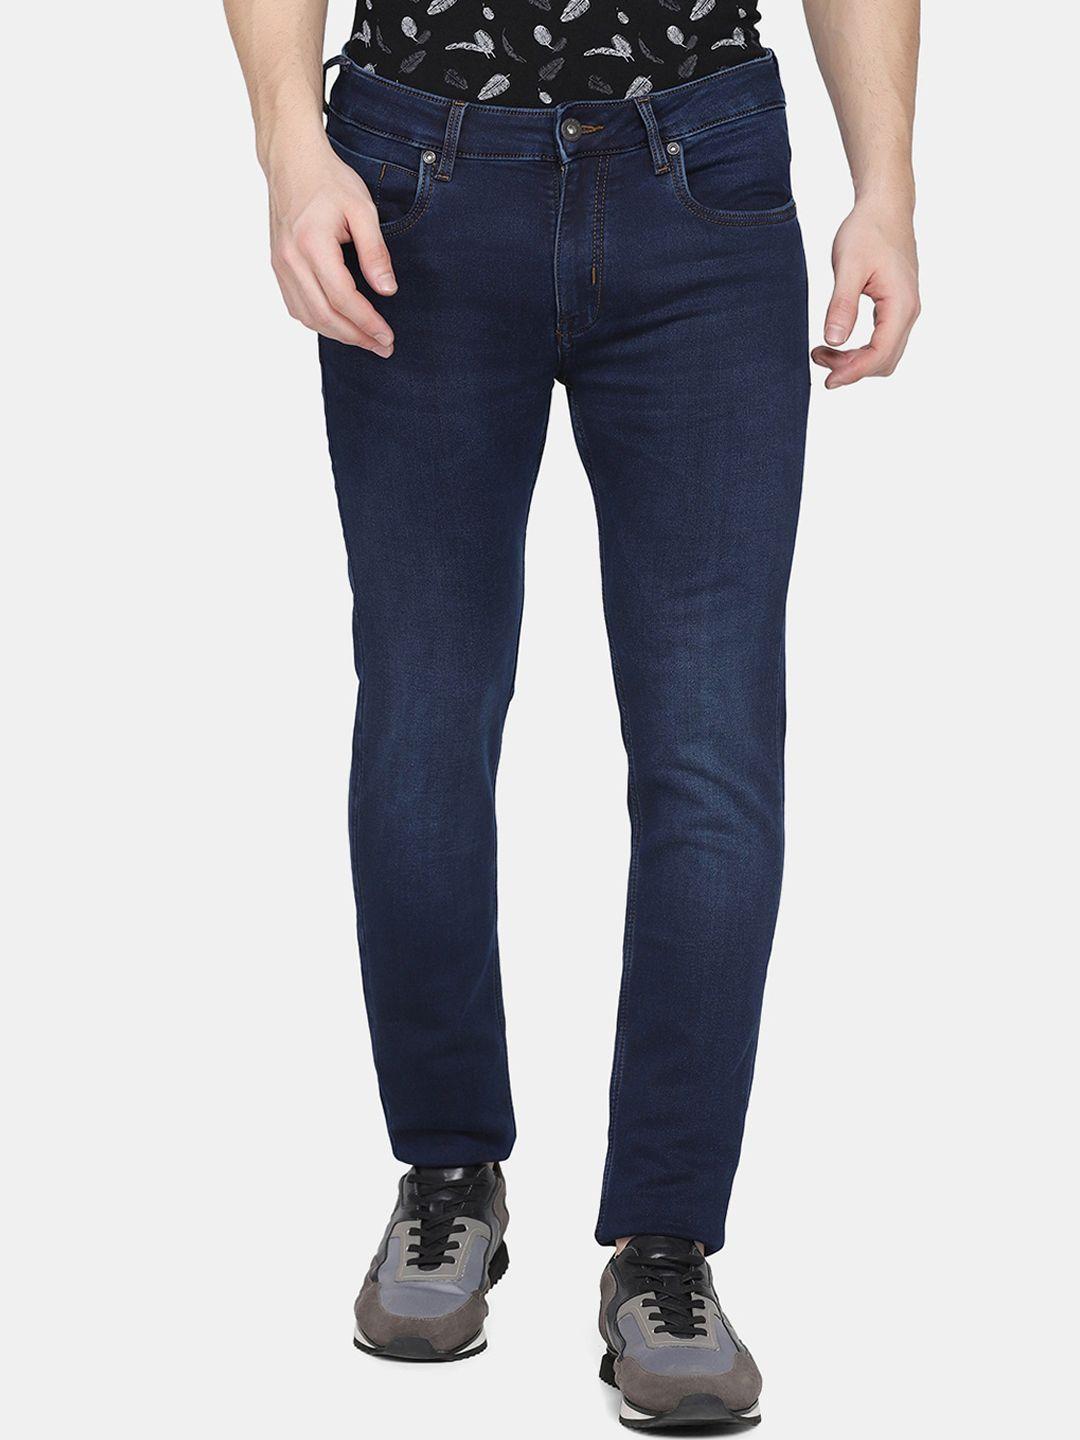 blackberrys-men-blue-skinny-fit-low-rise-highly-distressed-jeans